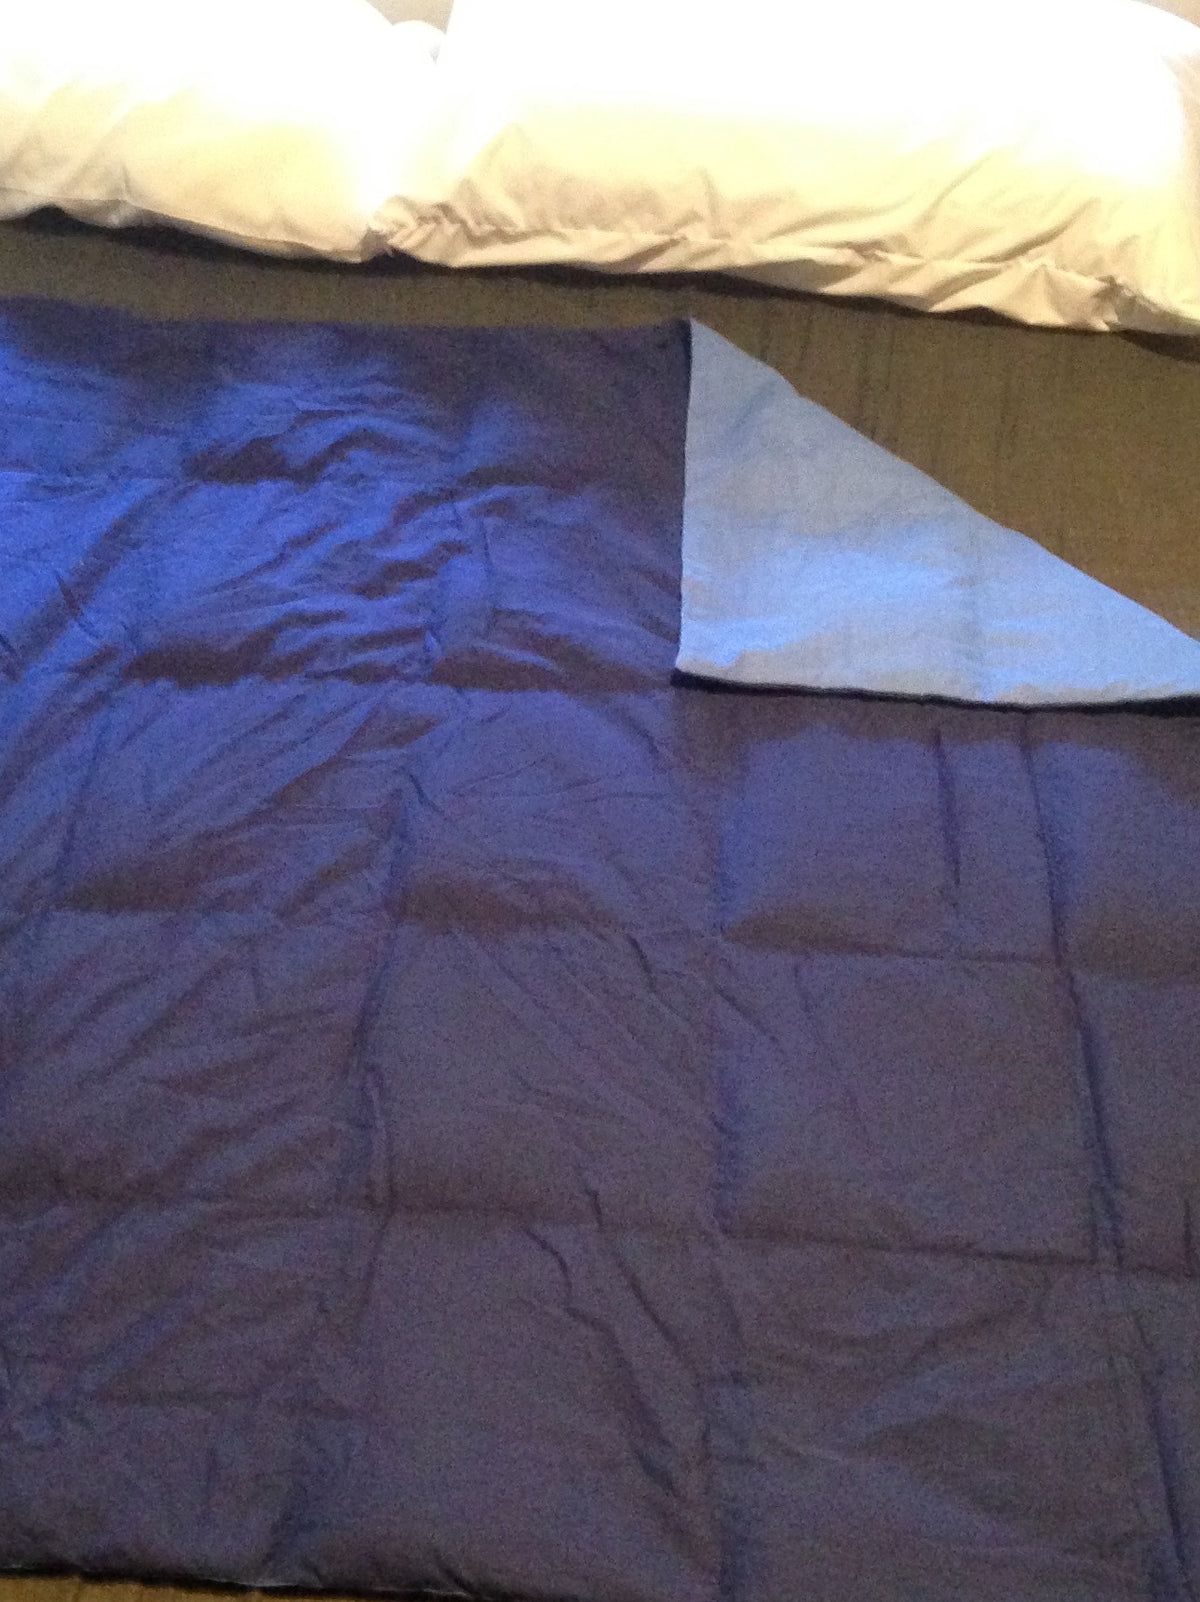 Weighted Blanket - Single bed size (blue on blue)